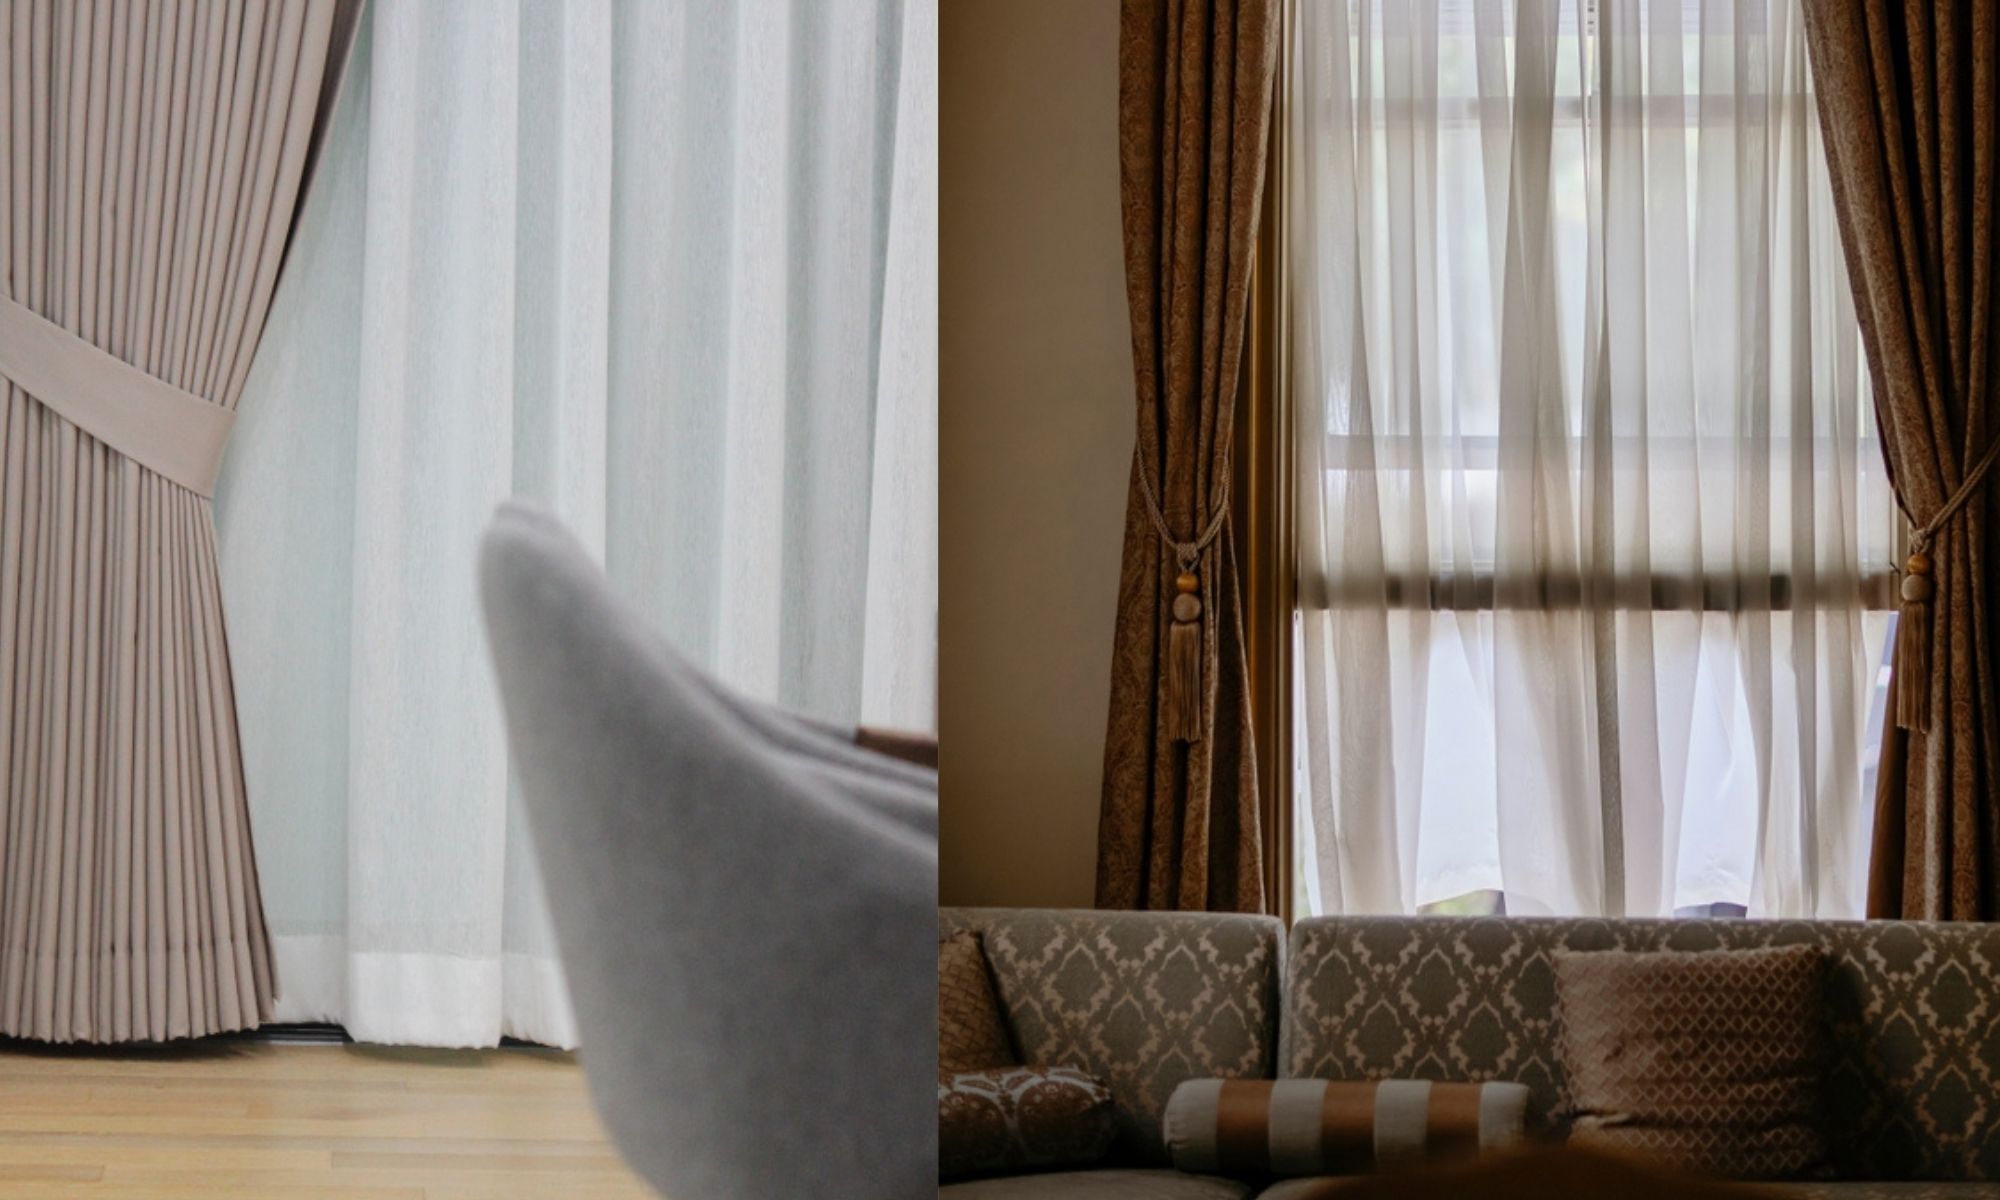 Advantages of Using Sheer Curtains